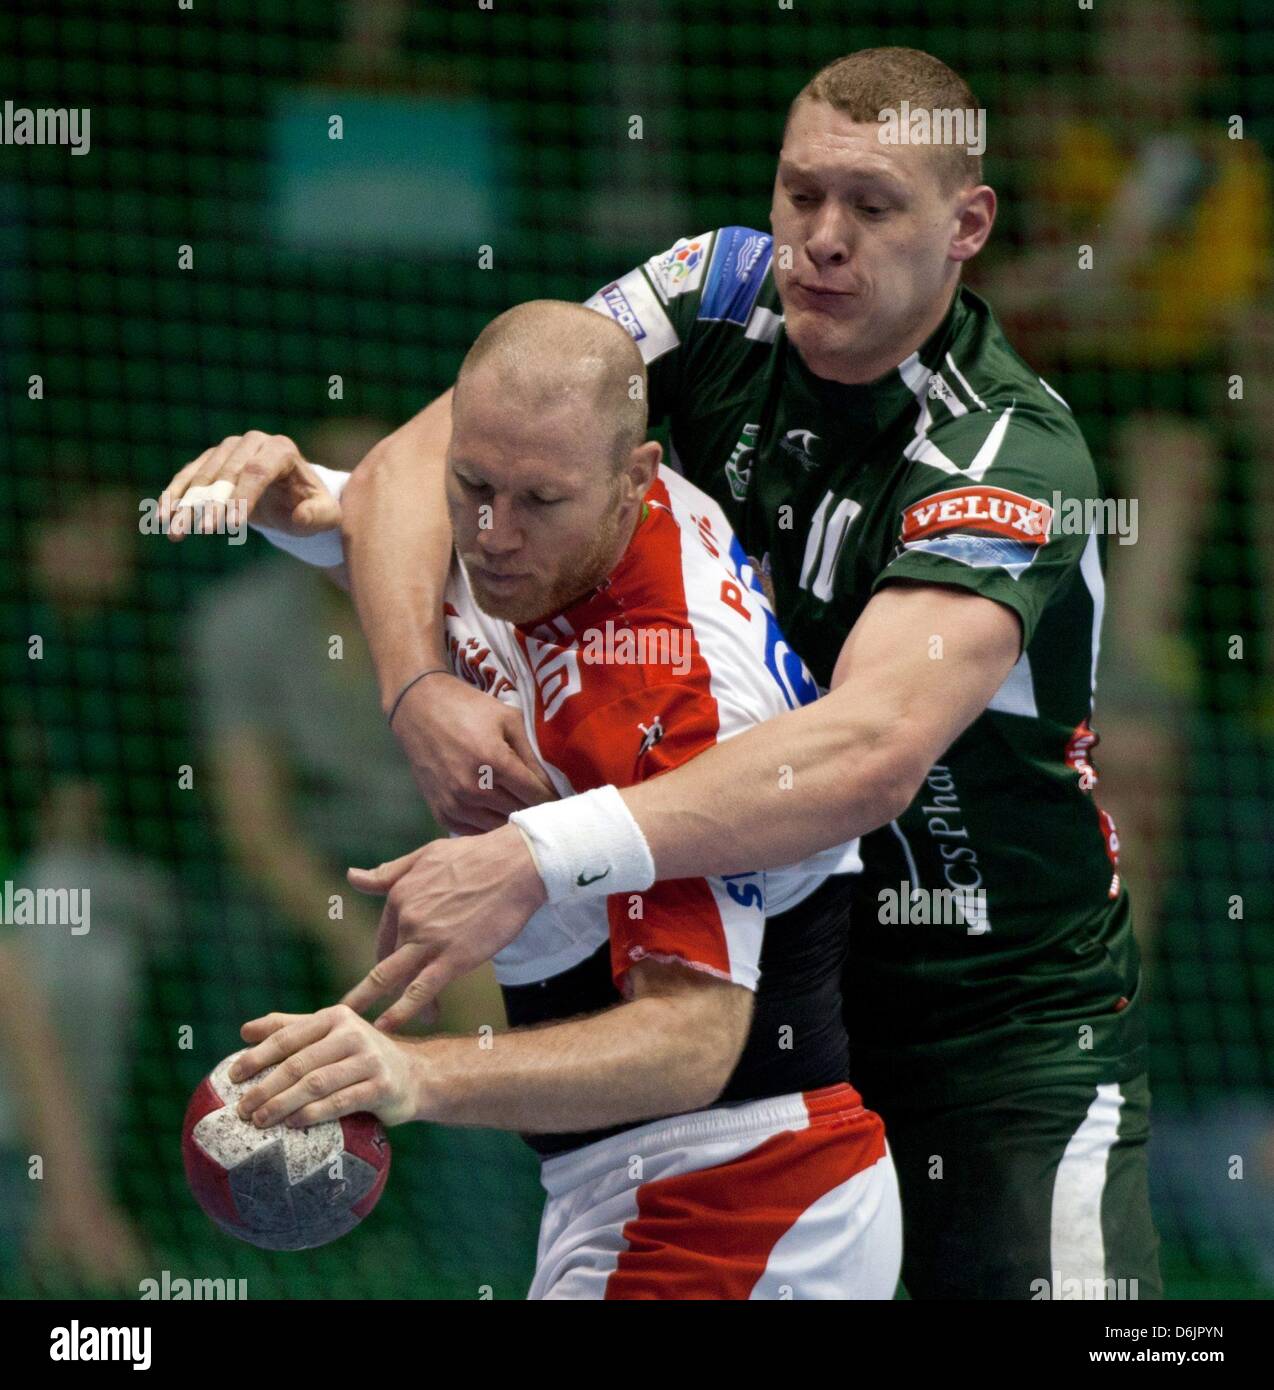 Presov's Dainis Kristopans (R) holds Magdeburg's Ales Pajovic during the Handball EHF Cup men's quarter final second leg match SC Magdeburg versus HT Tatran Presov at Getec Arena in Magdeburg, Germany, 24 March 2012. Photo: JENS WOLF Stock Photo